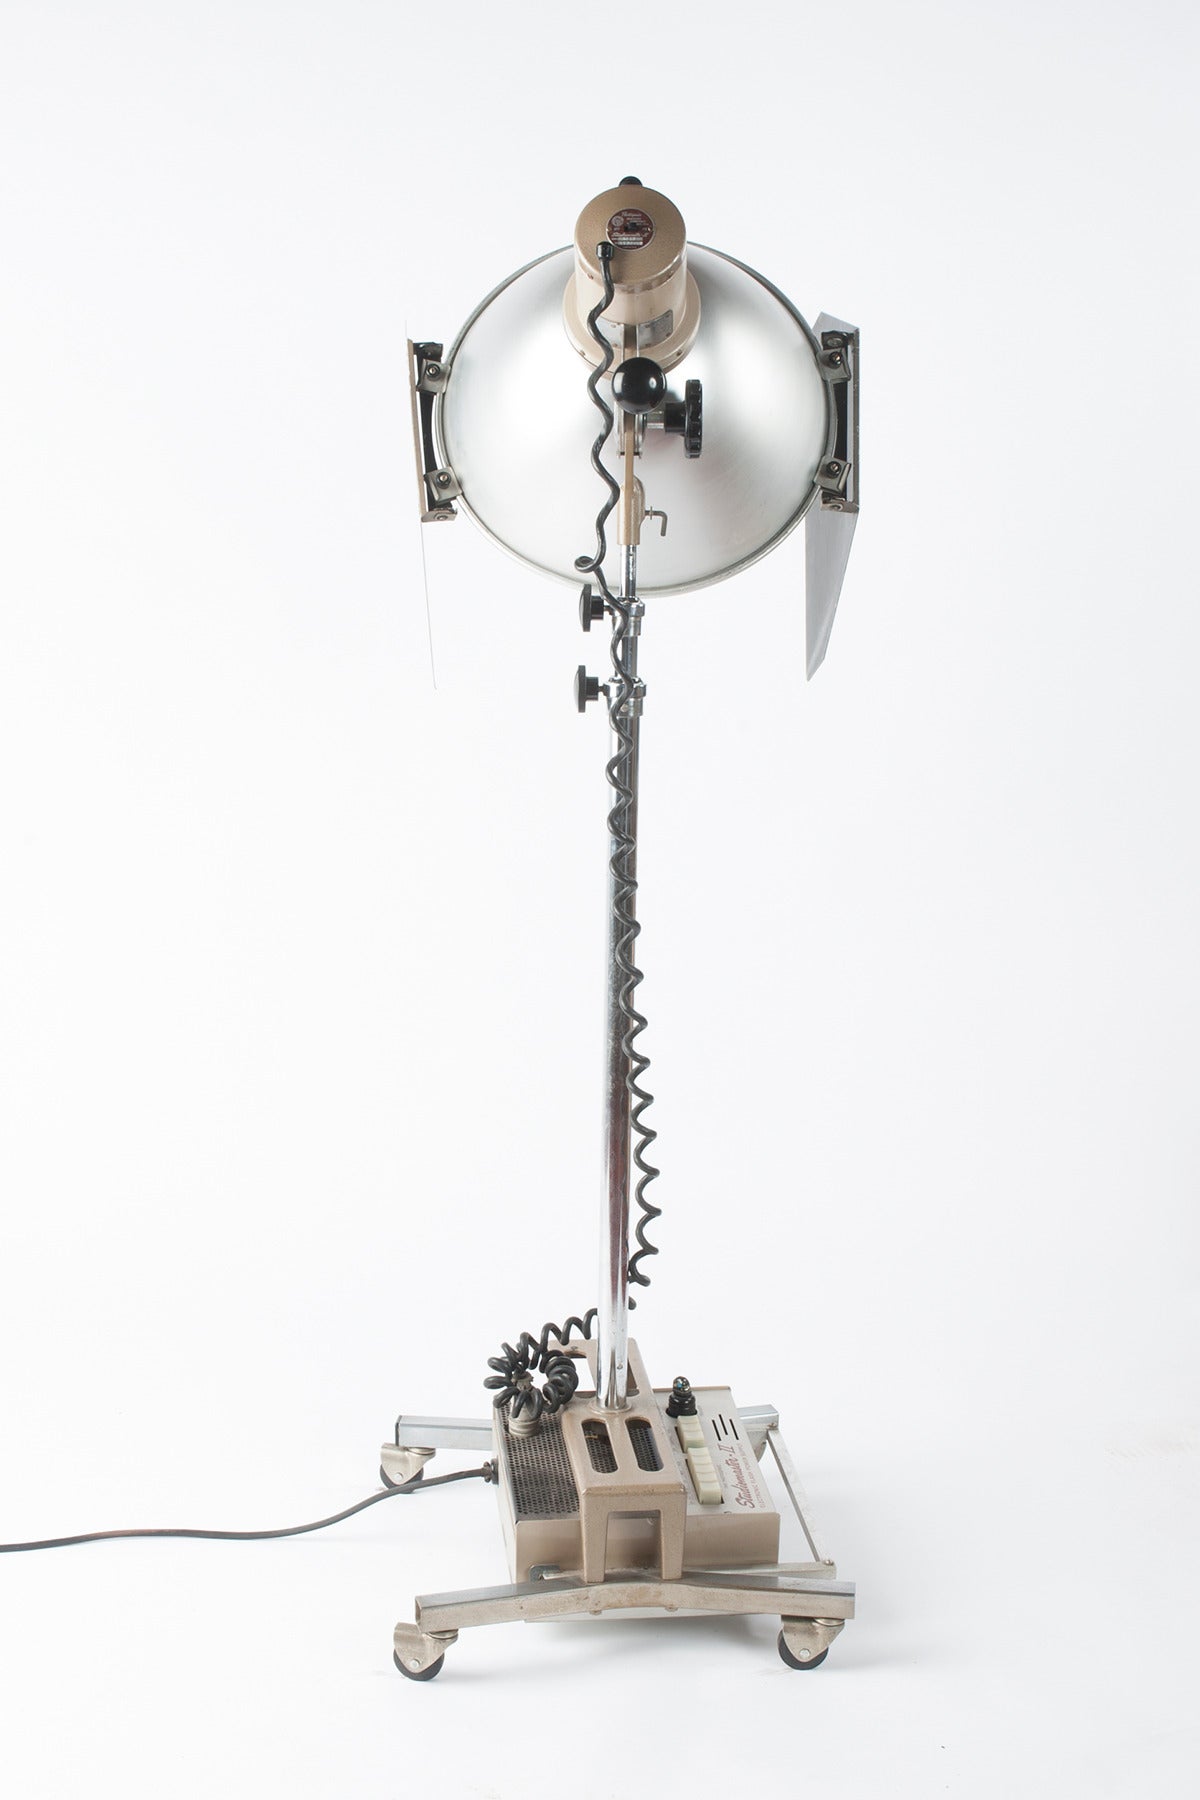 Two industrial 1960s photogenic machine company flashmaster II adjustable studio flash with modeling lamp, barn doors and diffuser on a Mole-Richardson stand in fine working condition. Two photogenic spotlights also available for purchase.

Four